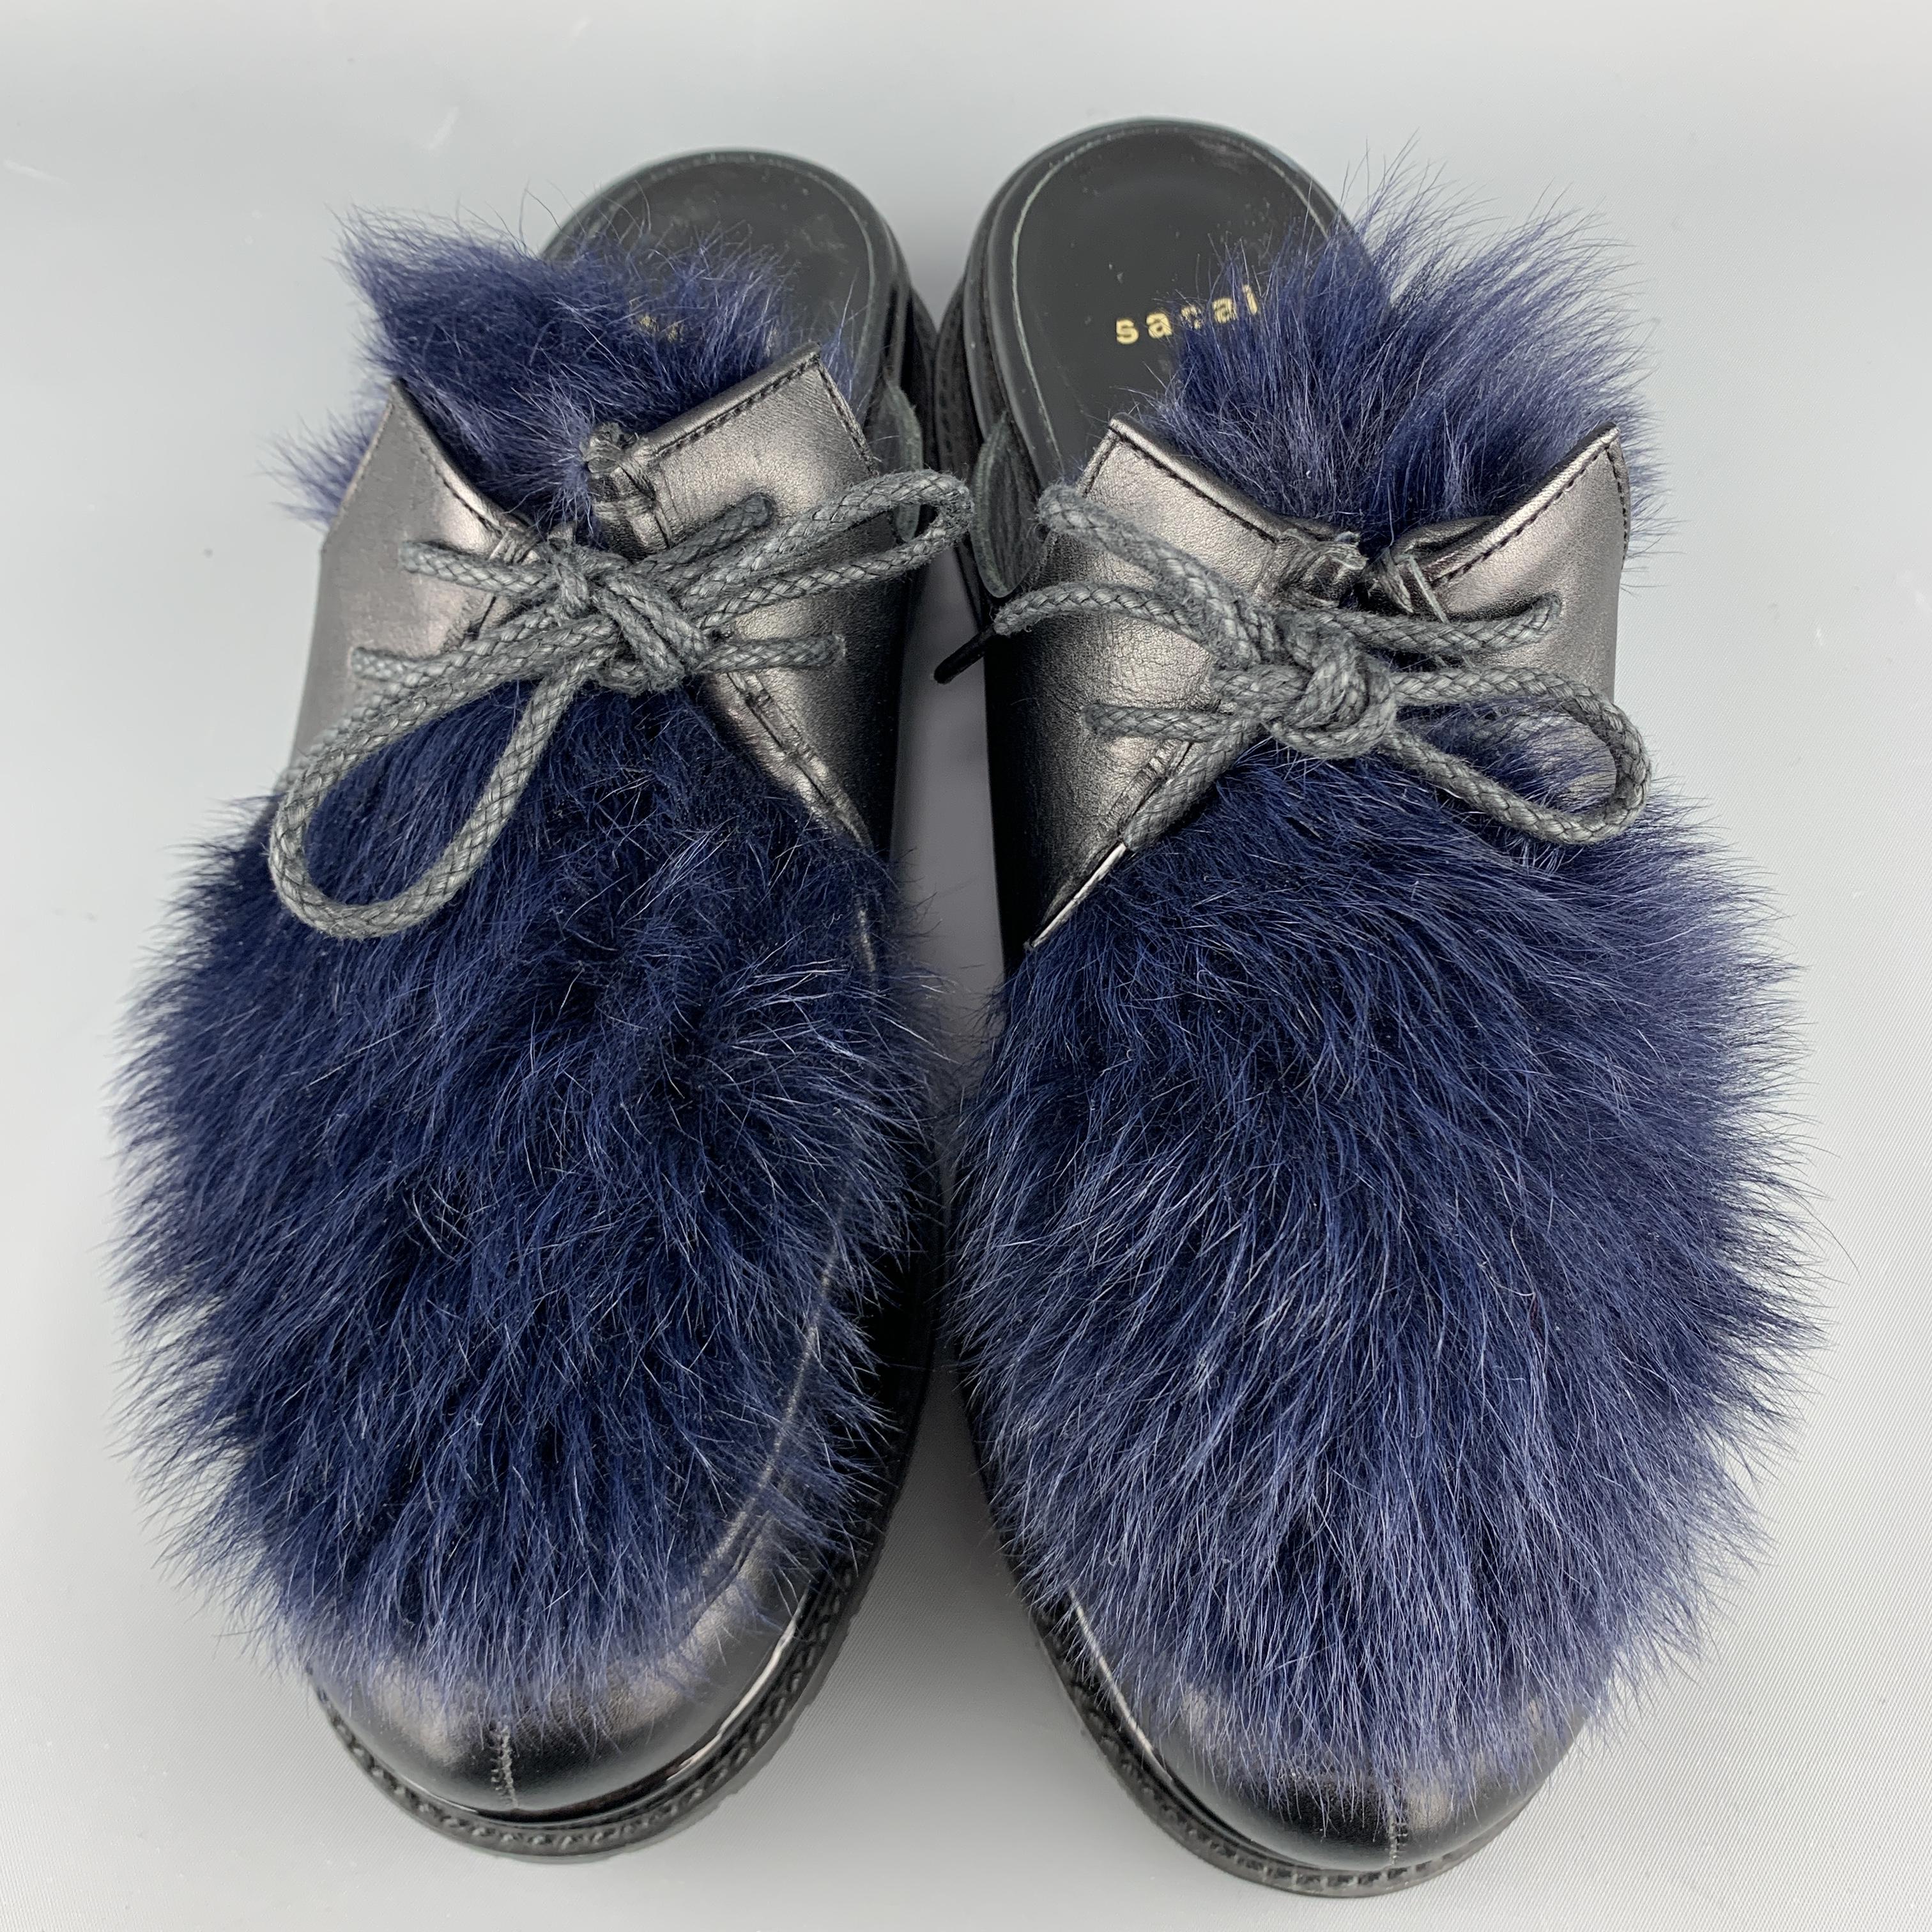 SACAI loafer slides come in black leather with a patent leather mid sole, Vibram commando sole, and navy blue fur top panel. Made in Japan.

Excellent Pre-Owned Condition.
Marked: IT 40

Outsole: 11.5 x 4.5 in.